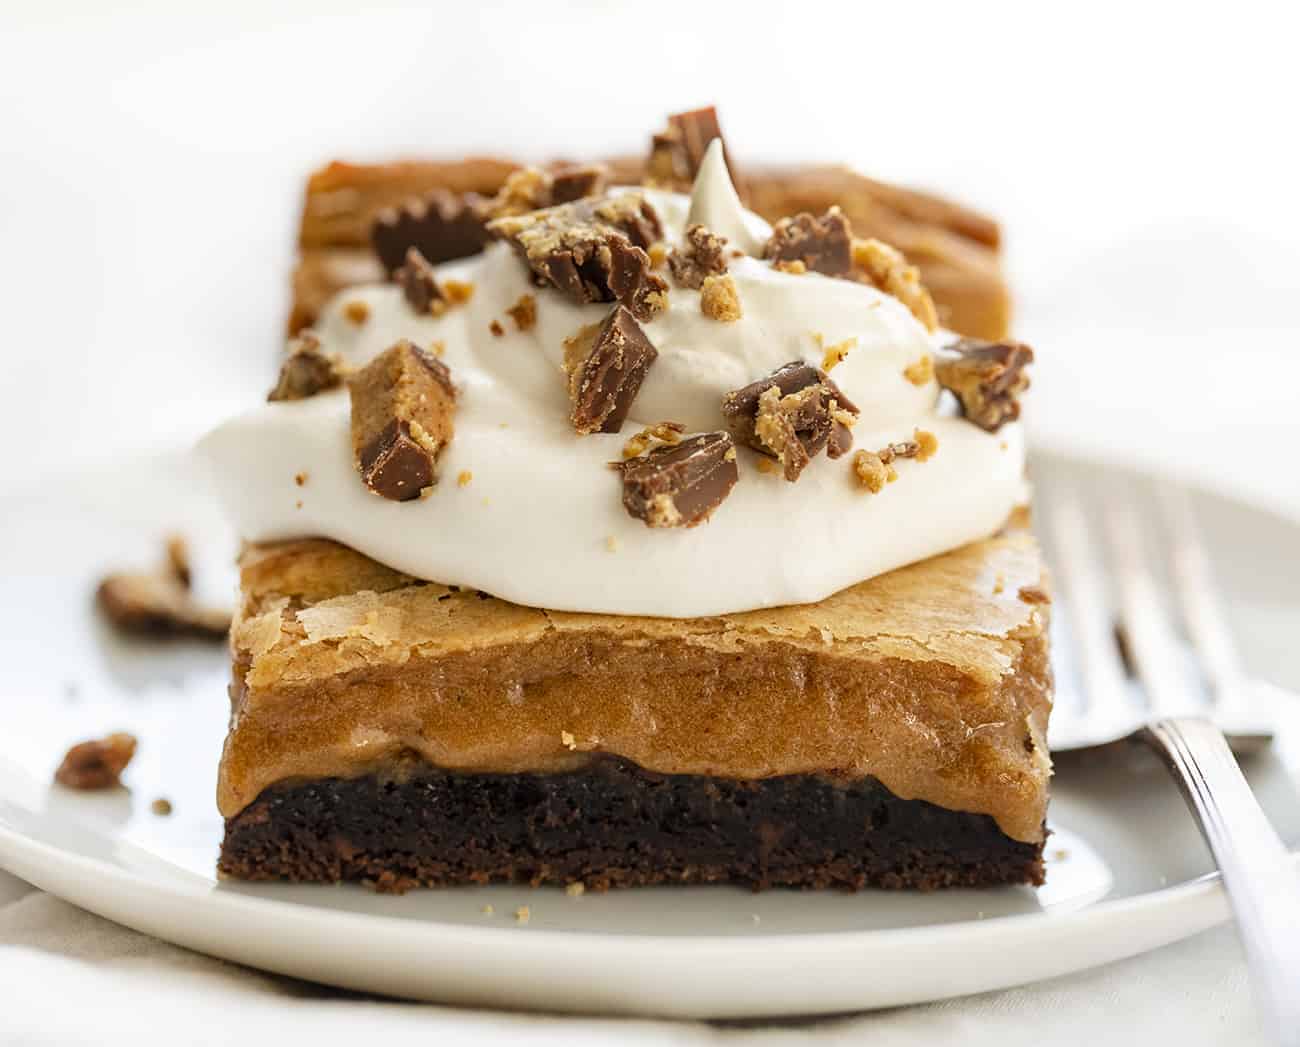 Reeses Ooey Gooey Cake Slice on a White Plate with Fork Next to It